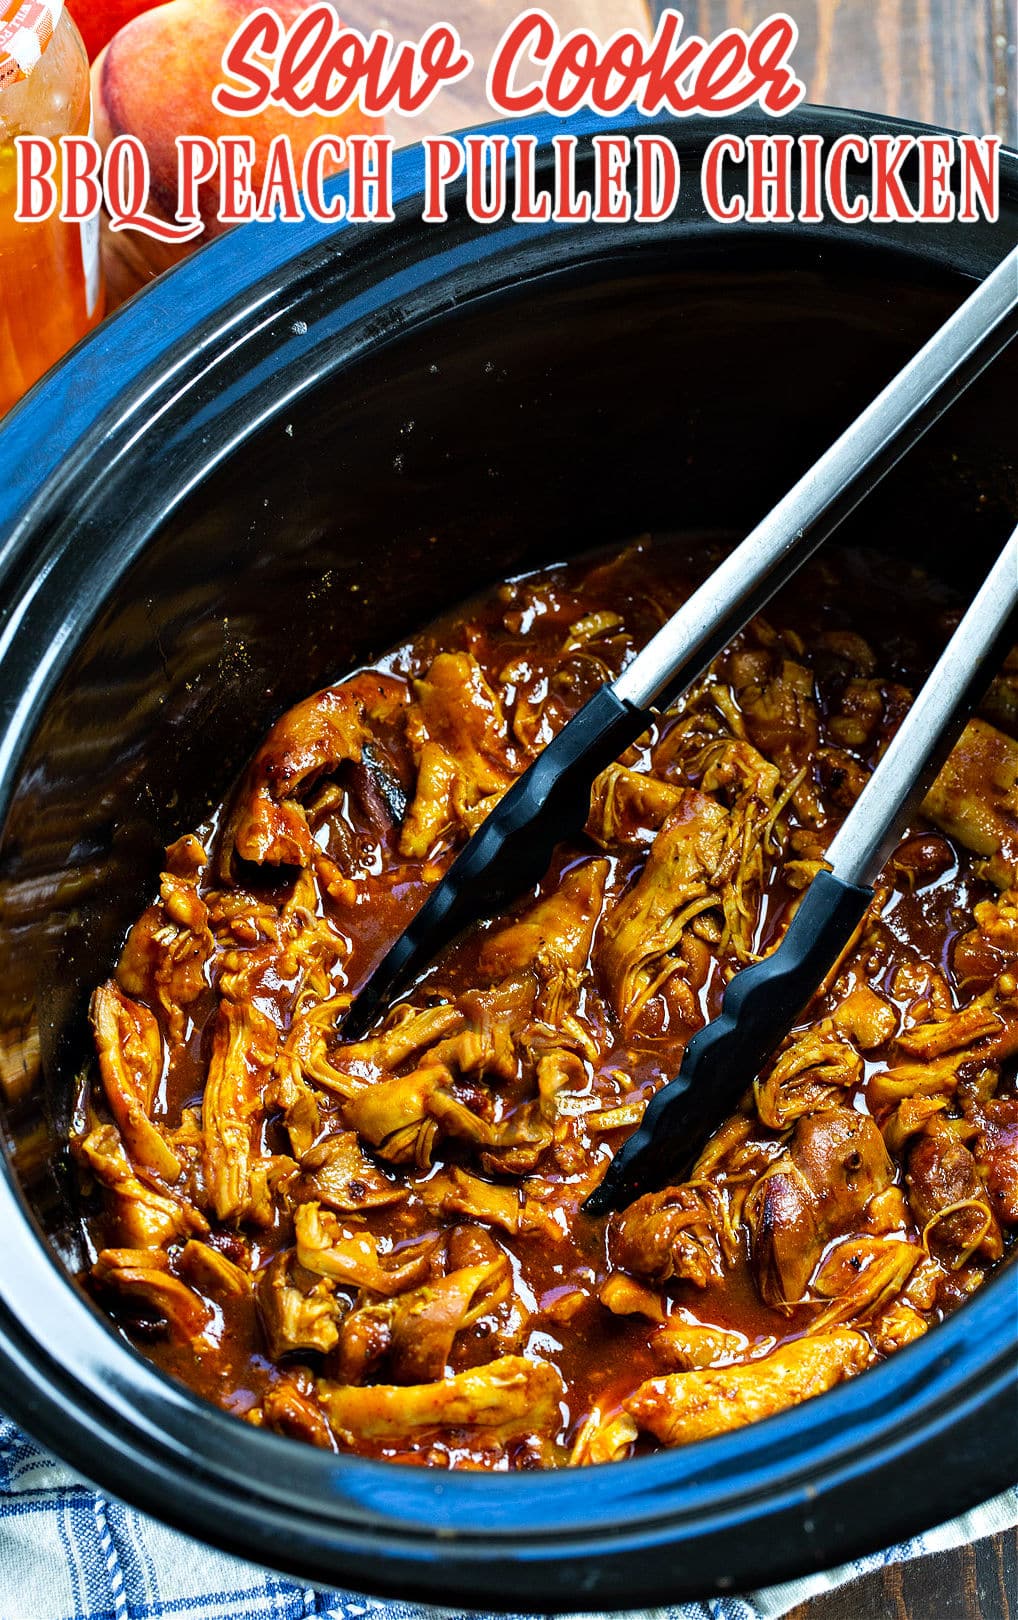 BBQ Peach Pulled Chicken in slow cooker.